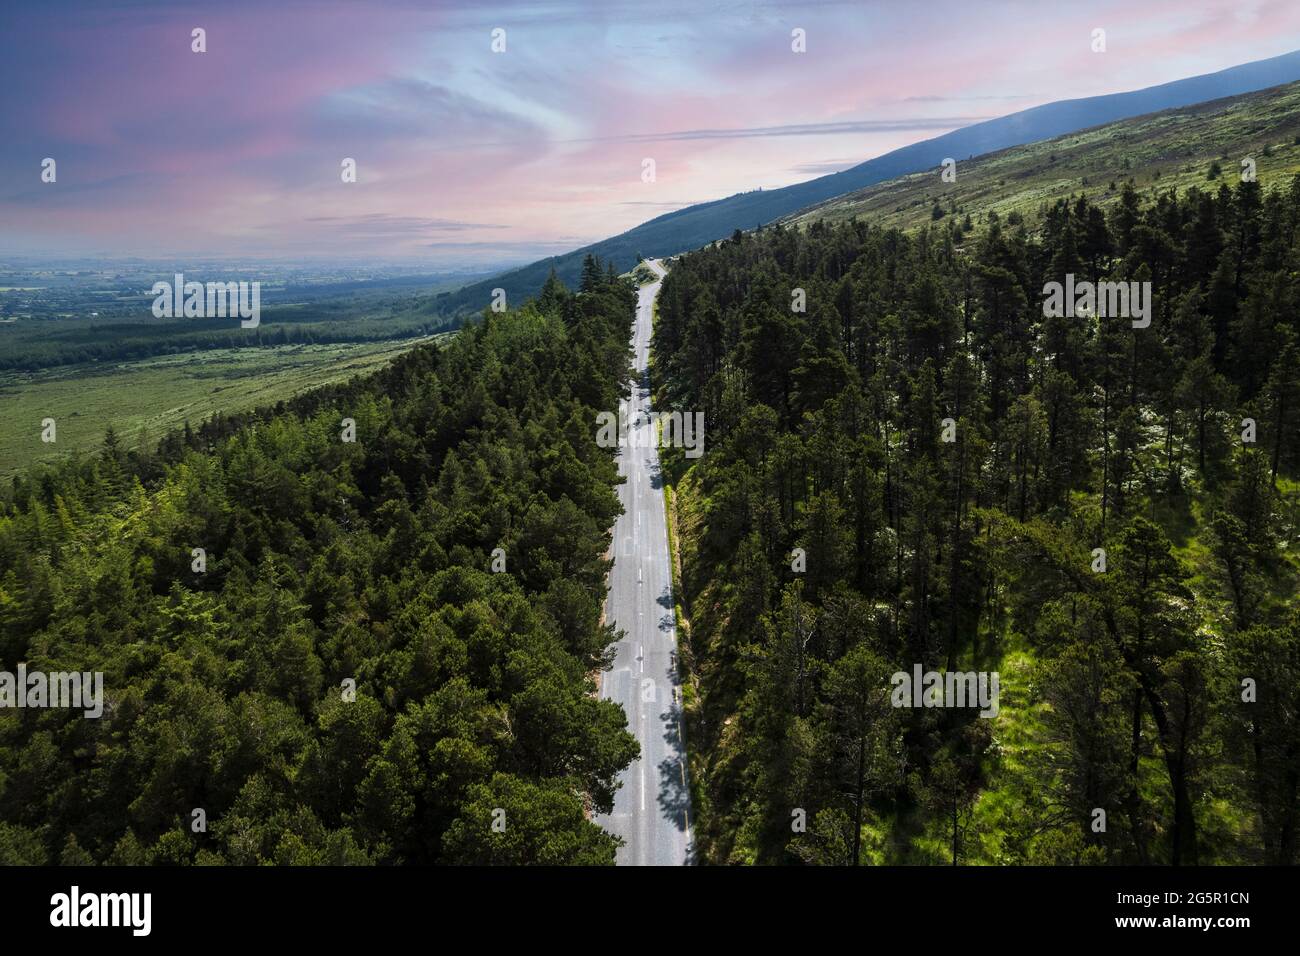 The road leading up to the Vee Pass in the Knockmealdown mountains in Clogheen county Tipperary, Ireland Stock Photo